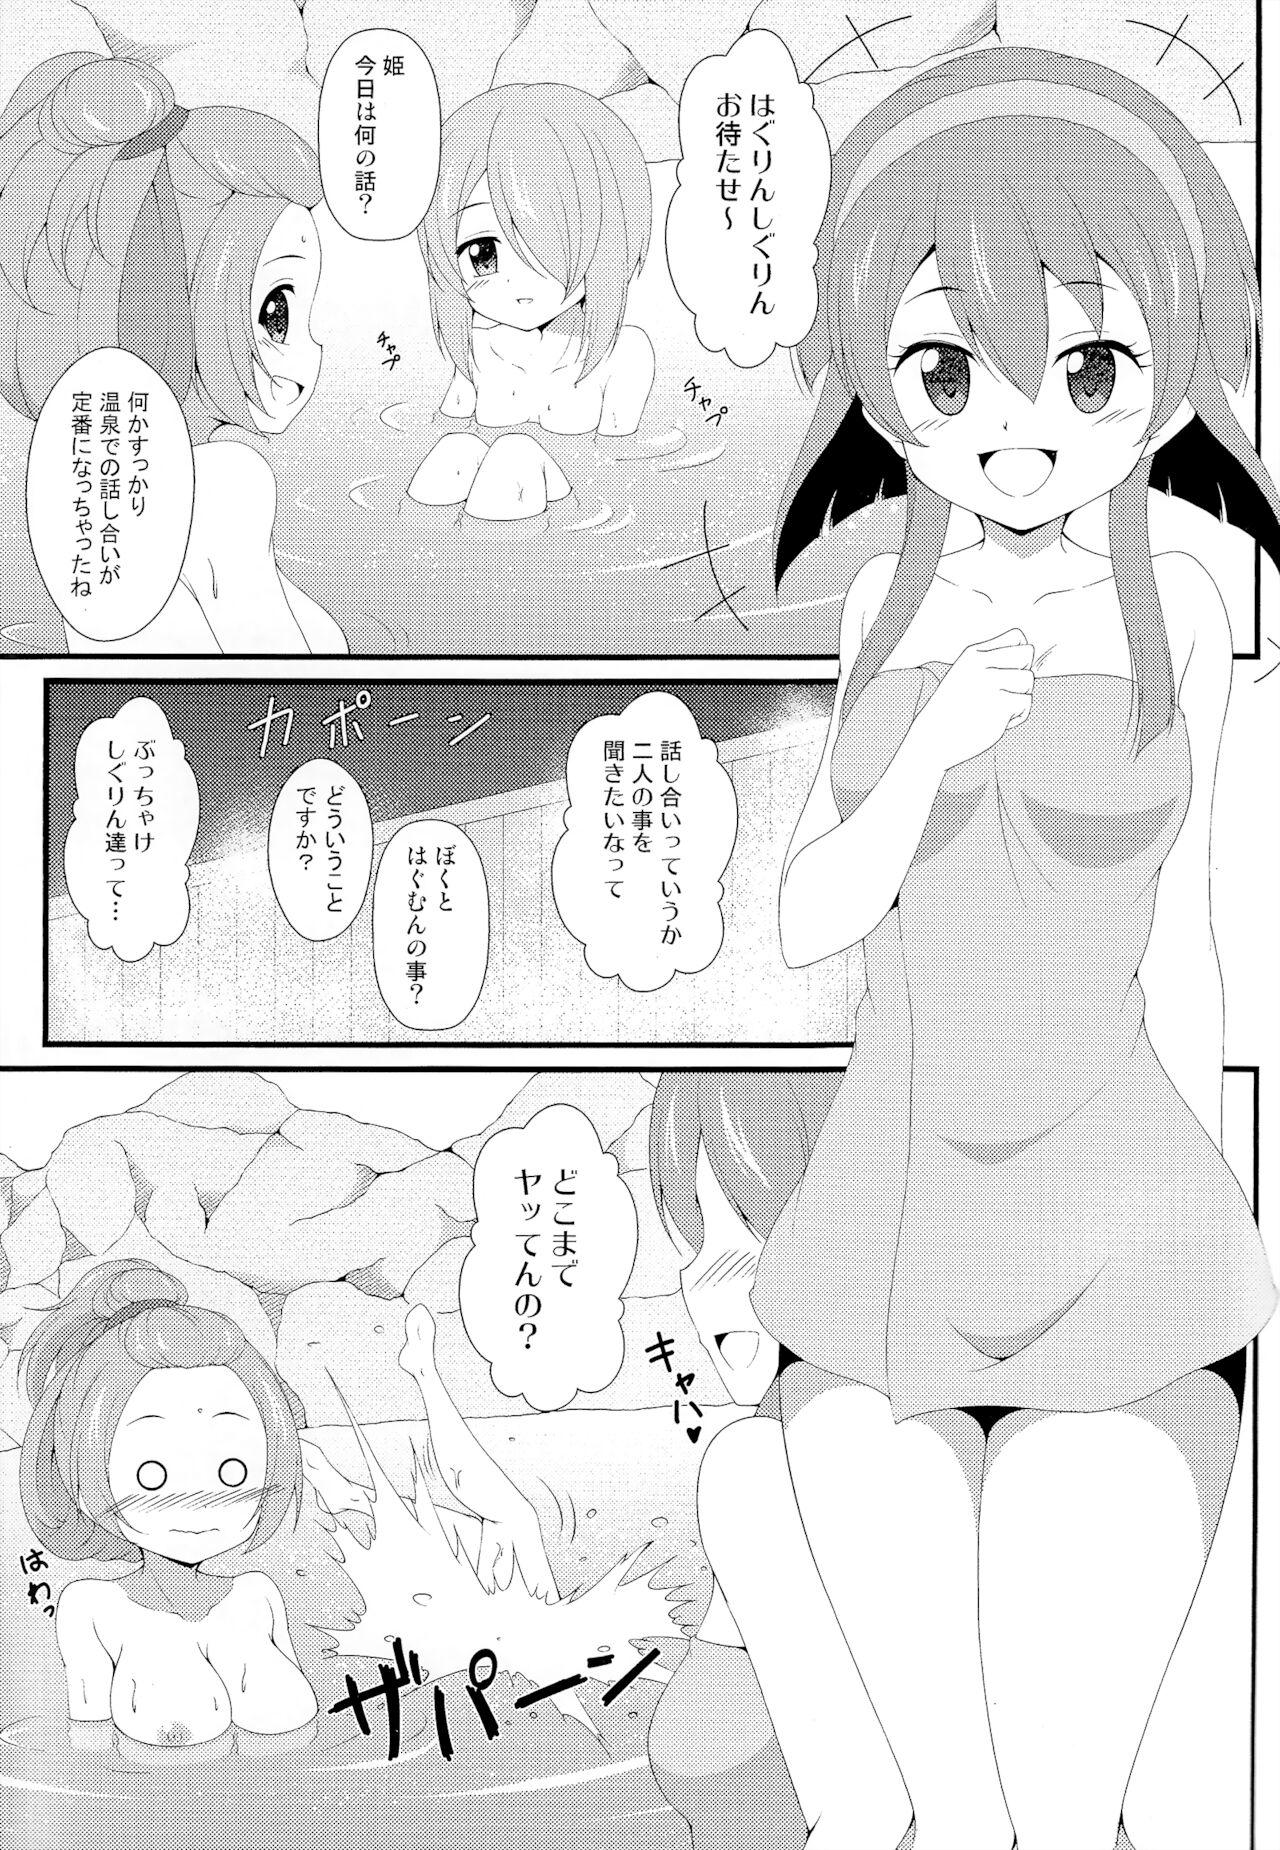 Gay Blondhair Isshoni Teppen Iko - Puella magi madoka magica side story magia record Sex Party - Page 2